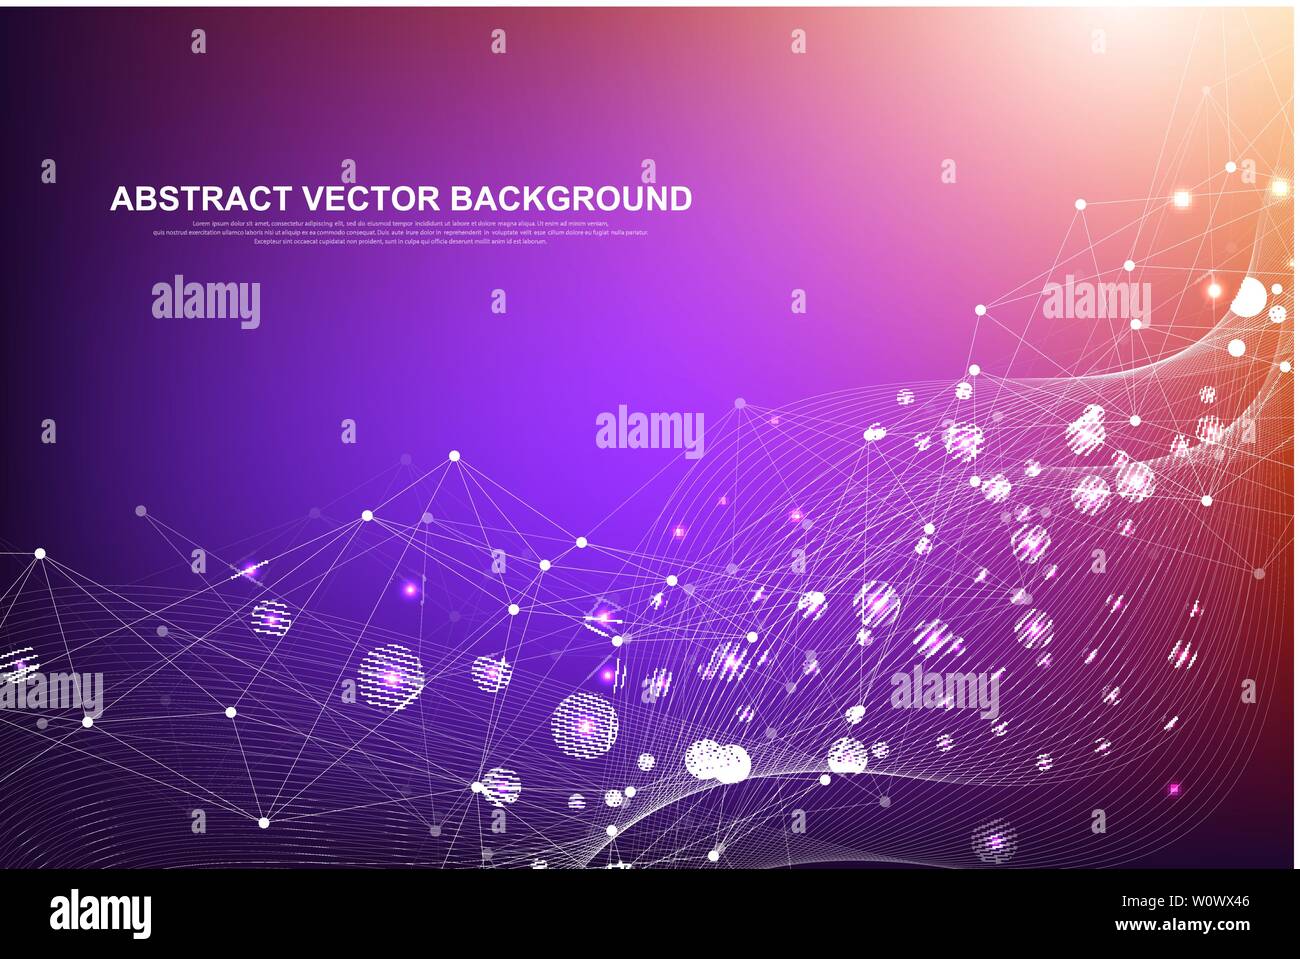 Big data visualization. Social network or business analytics representation. Abstract vector graphics. Futuristic infographic illustration Stock Vector